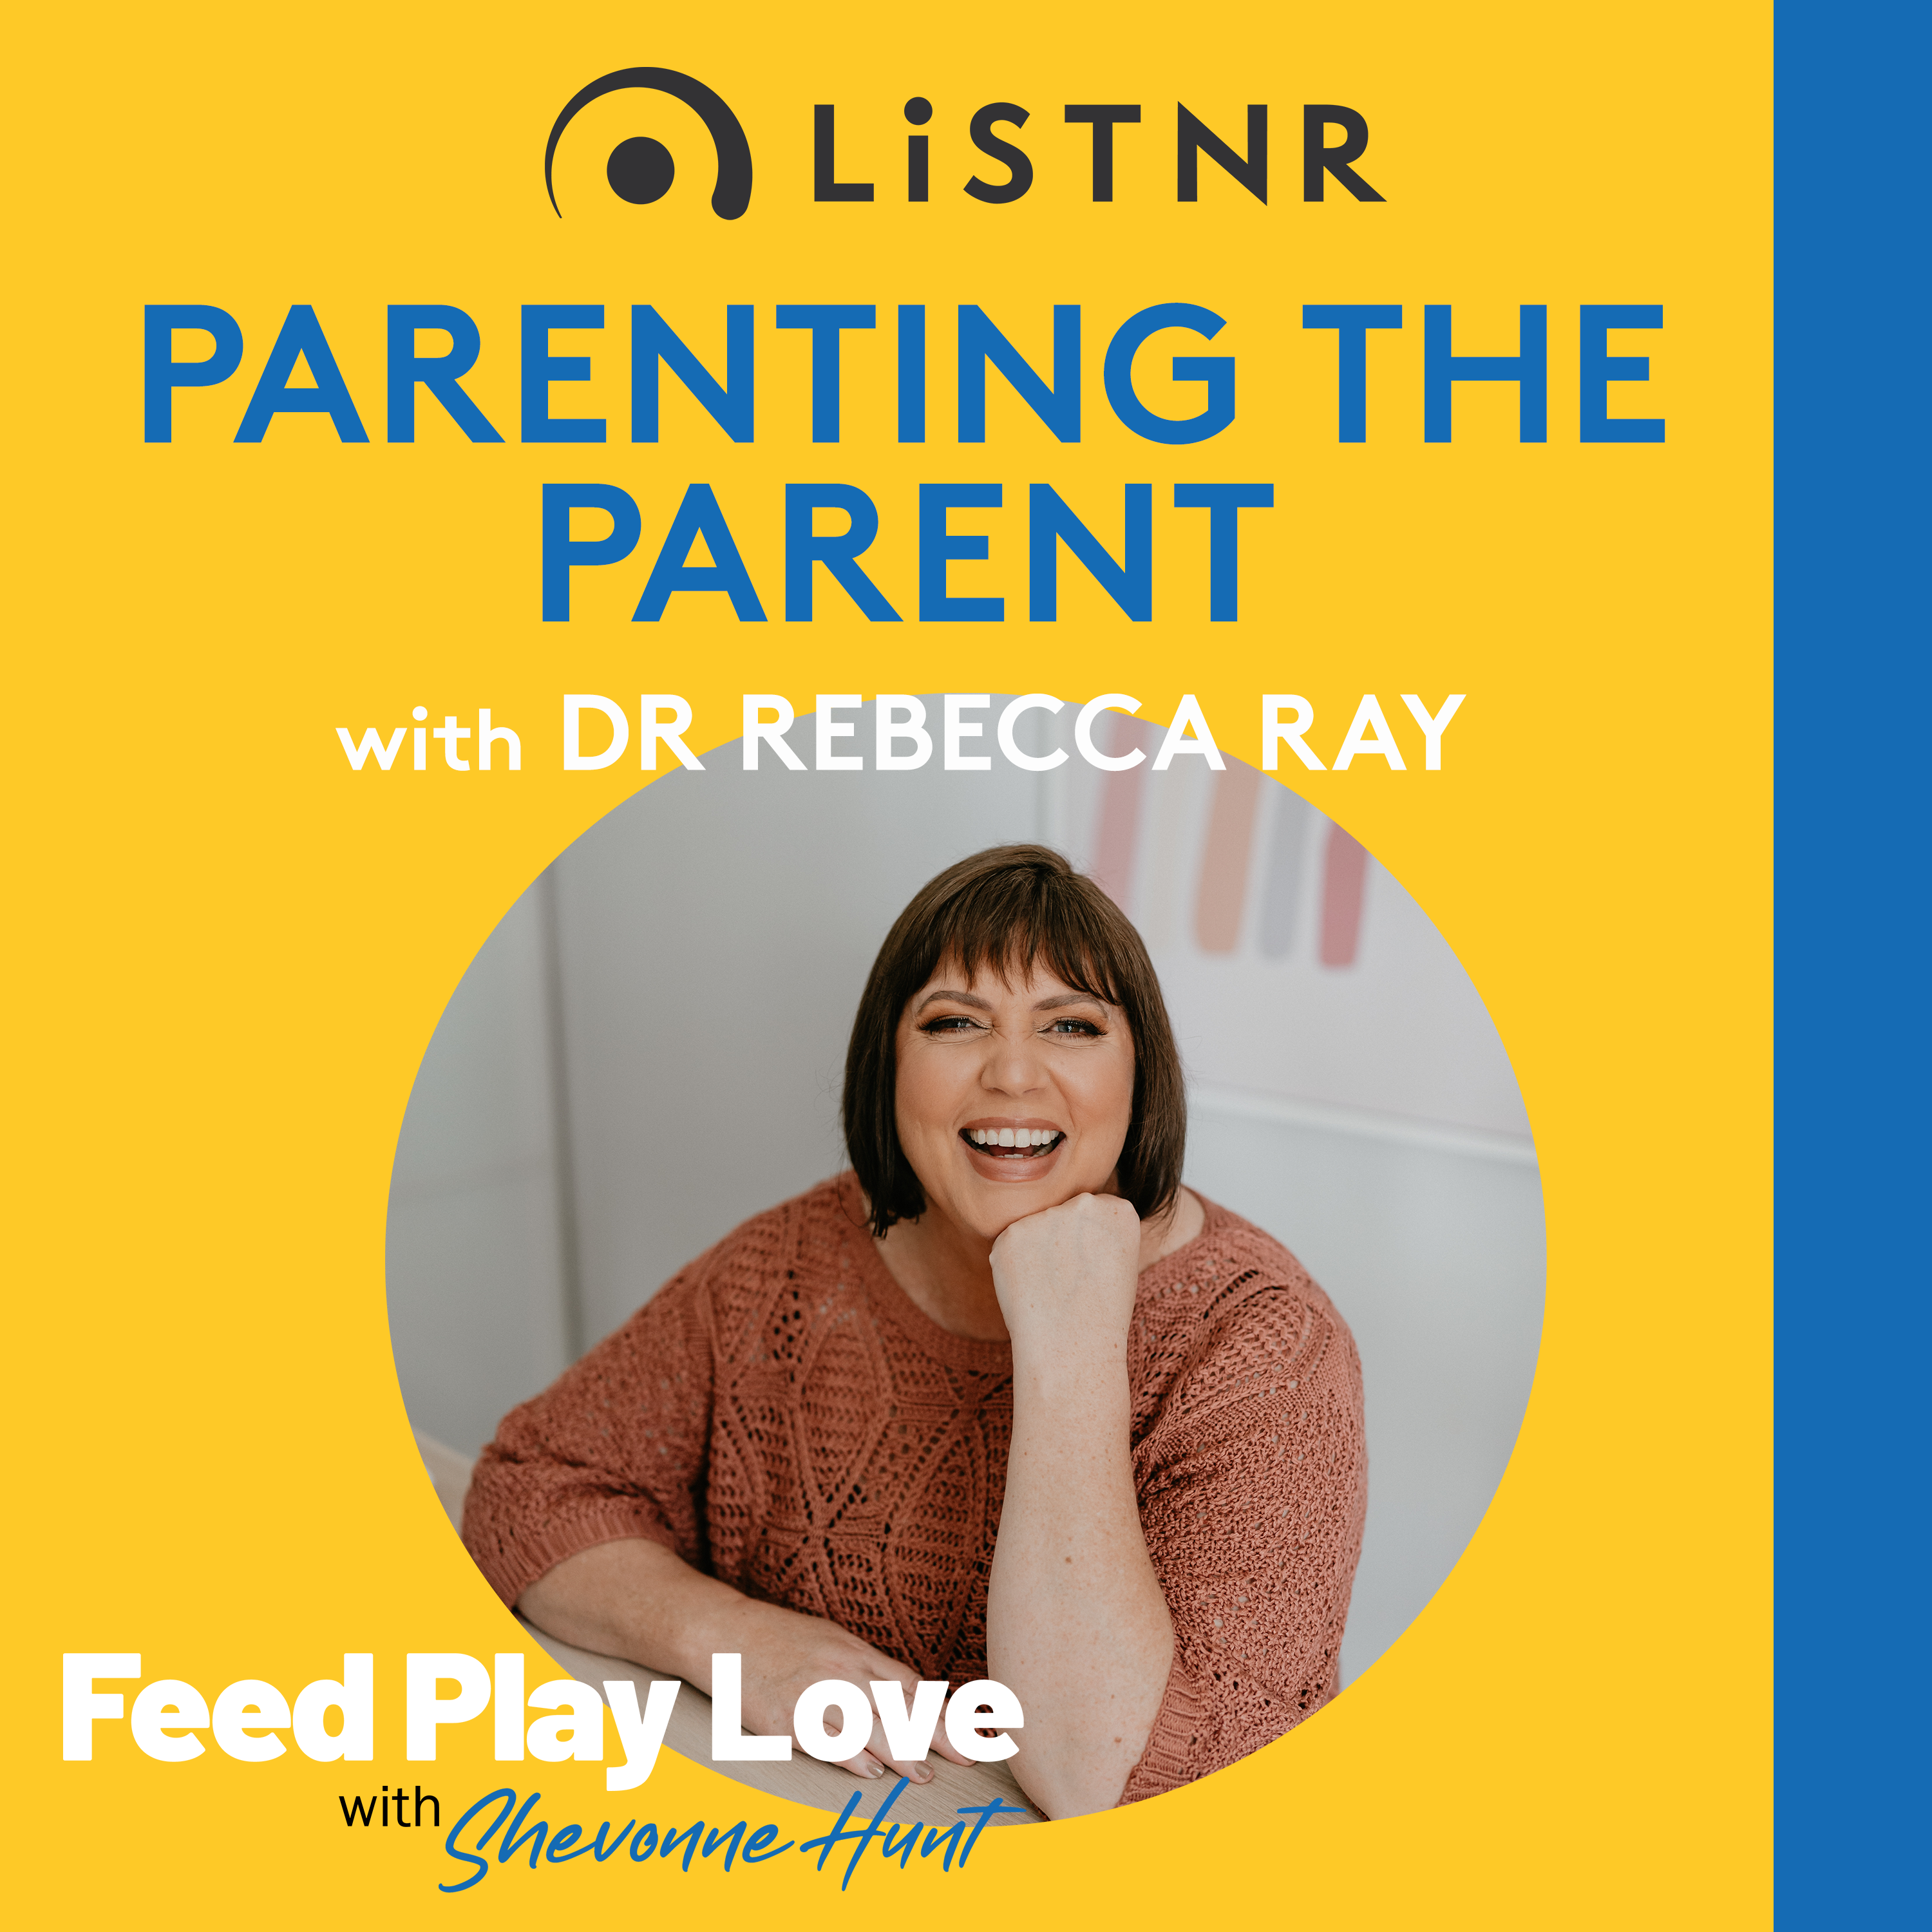 Easy, tiger! What your parenting style says about you (Parenting the Parent with Dr Rebecca Ray)